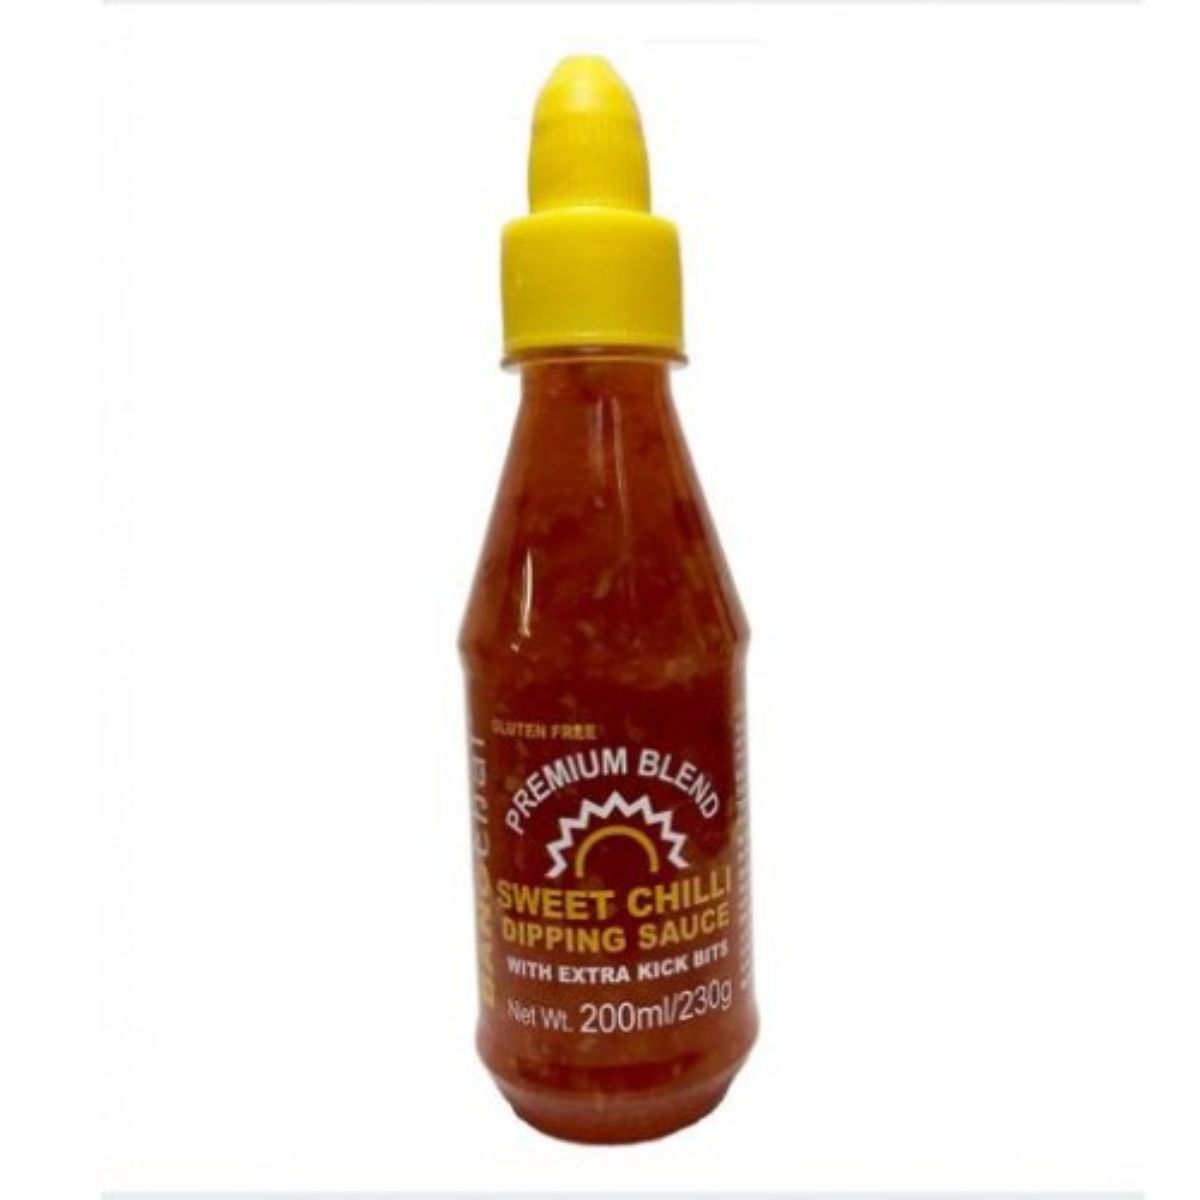 A bottle of Bang - Sweet Chilli Sauce - 200ml with a yellow cap, labeled "premium blend" and "gluten free," containing 200ml of the sauce.